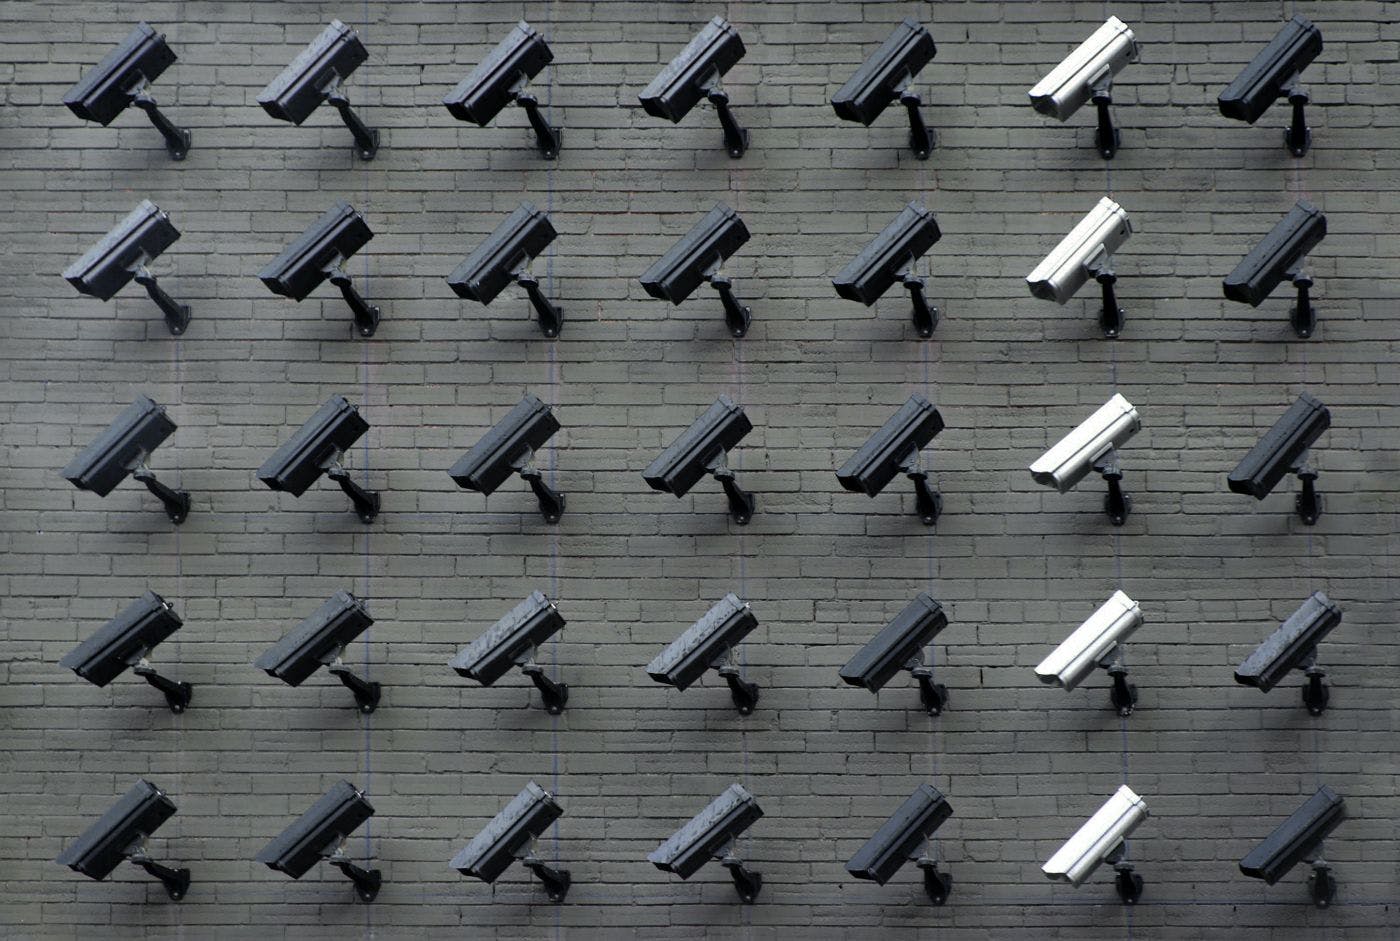 featured image - The Video Surveillance Trends Disrupting The Tech Industry